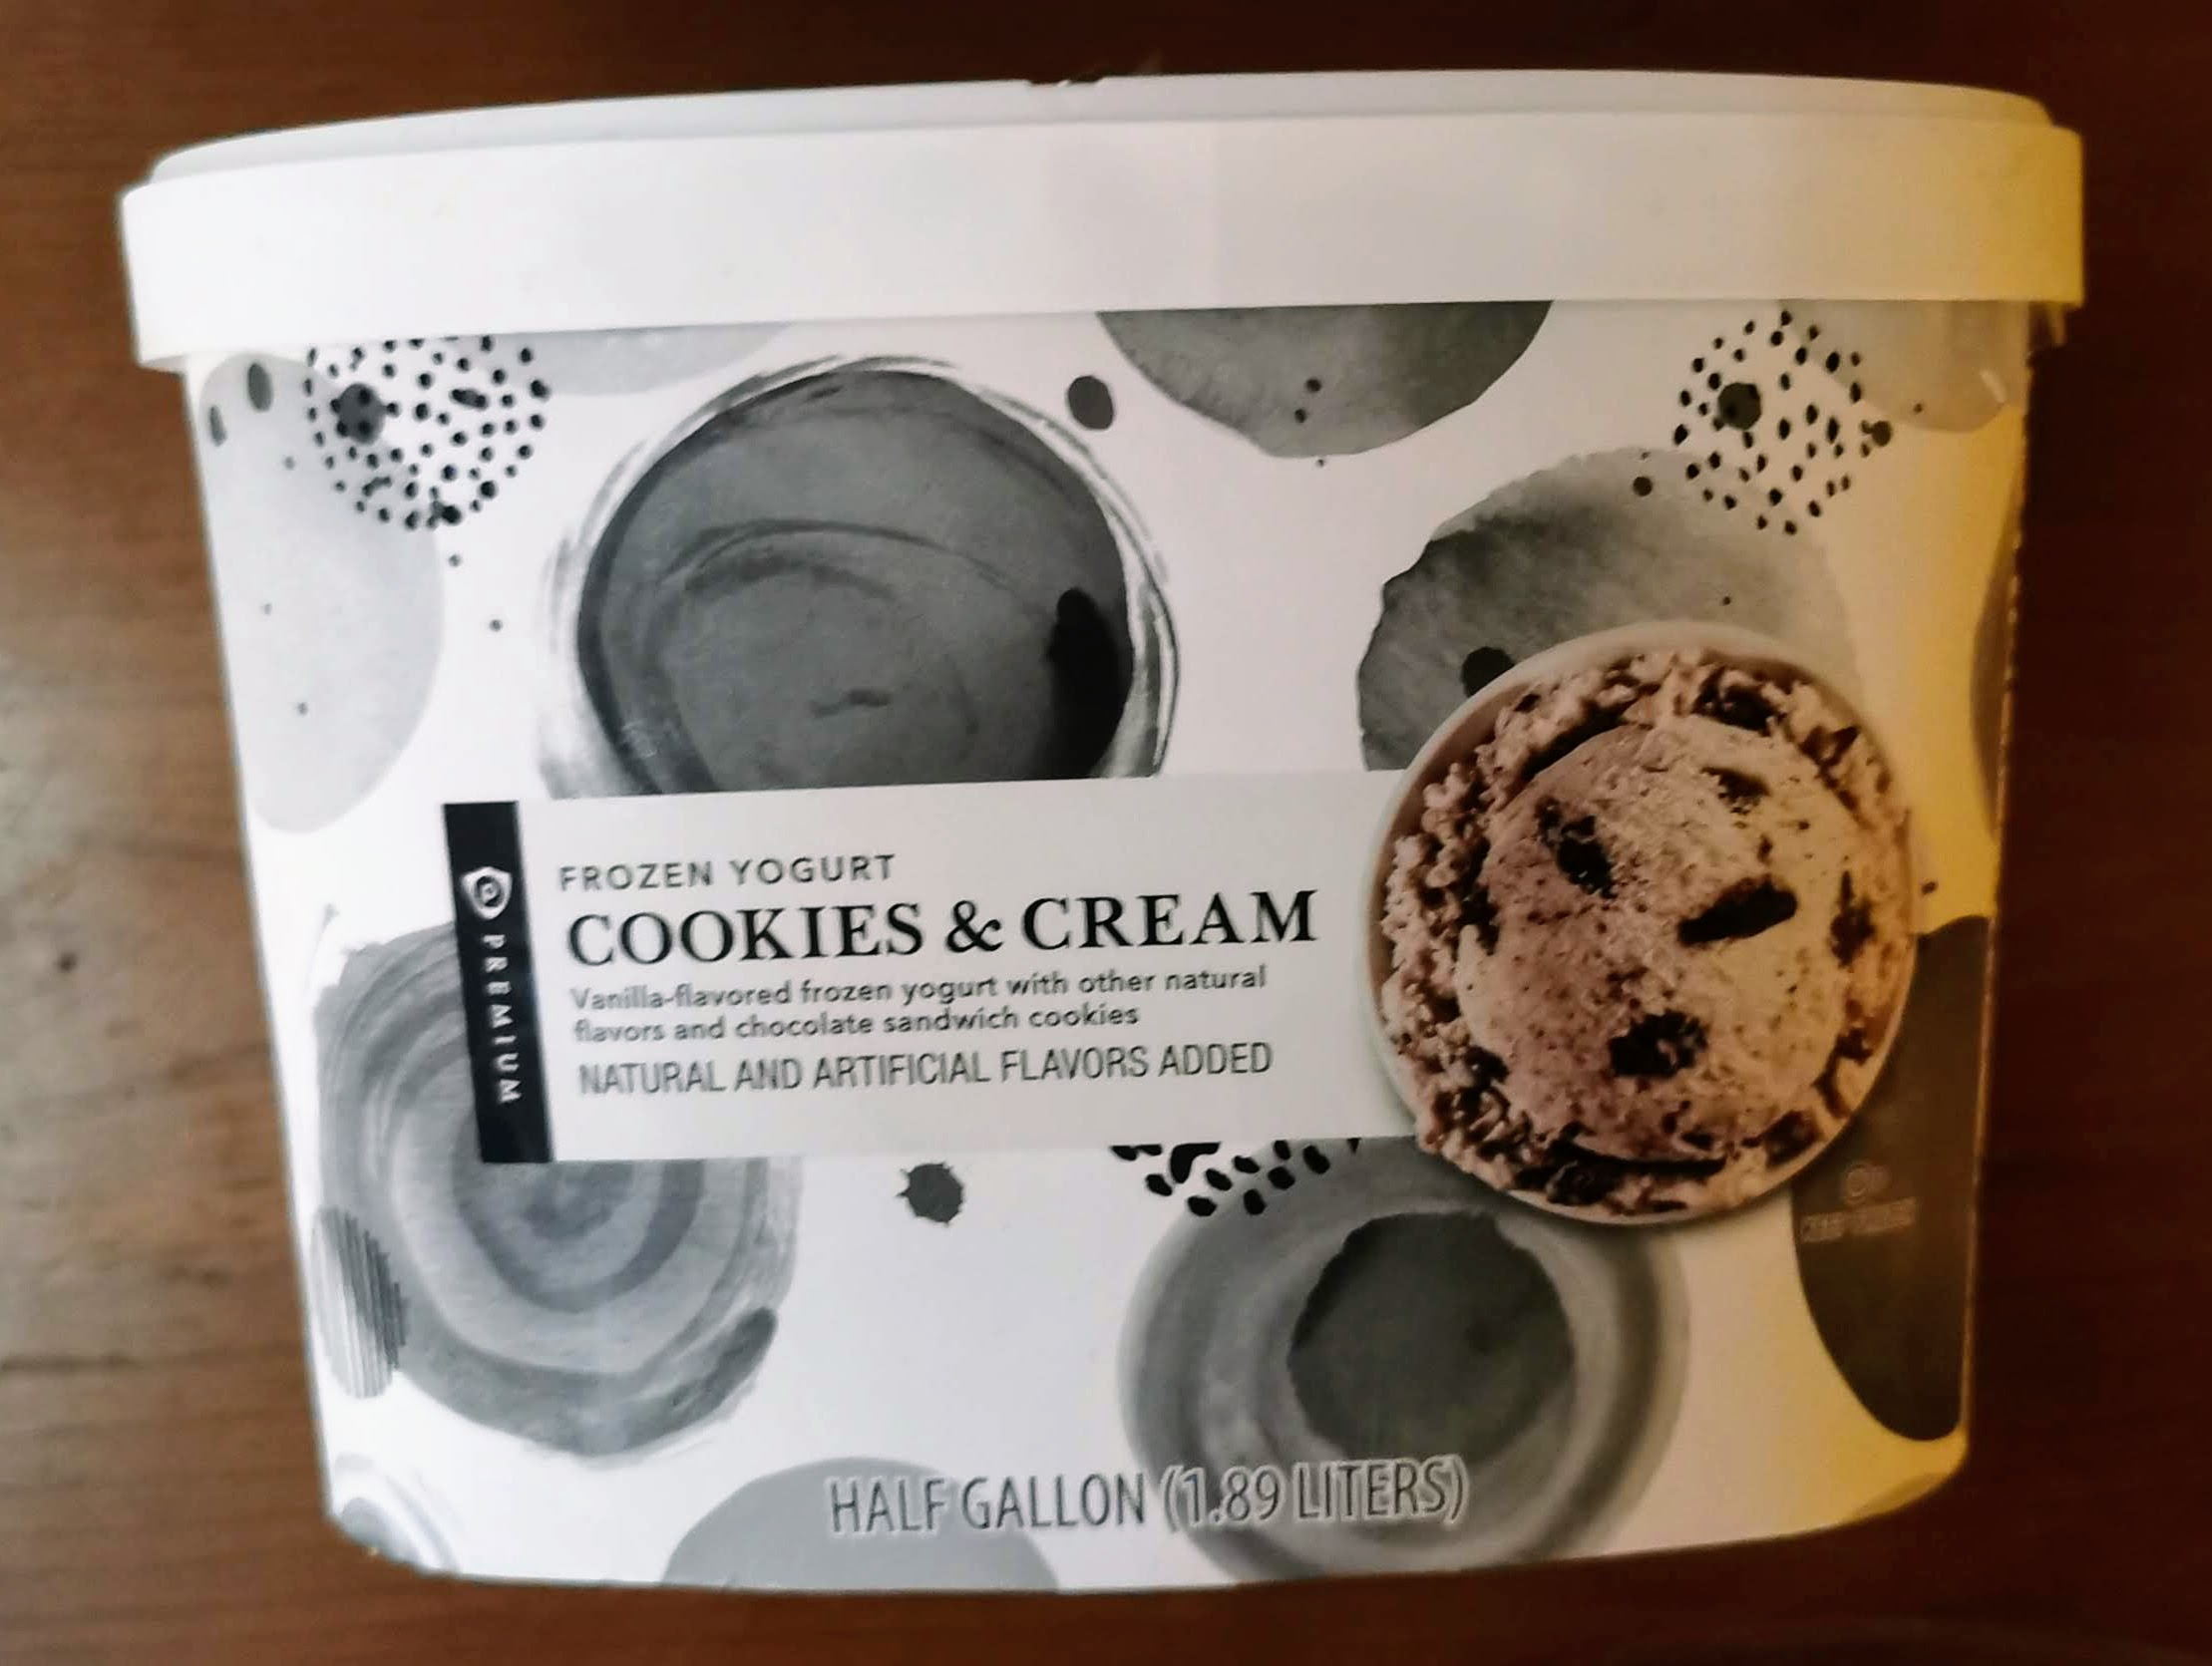 You are currently viewing Publix Premium Cookies and Cream Frozen Yogurt (Publix)